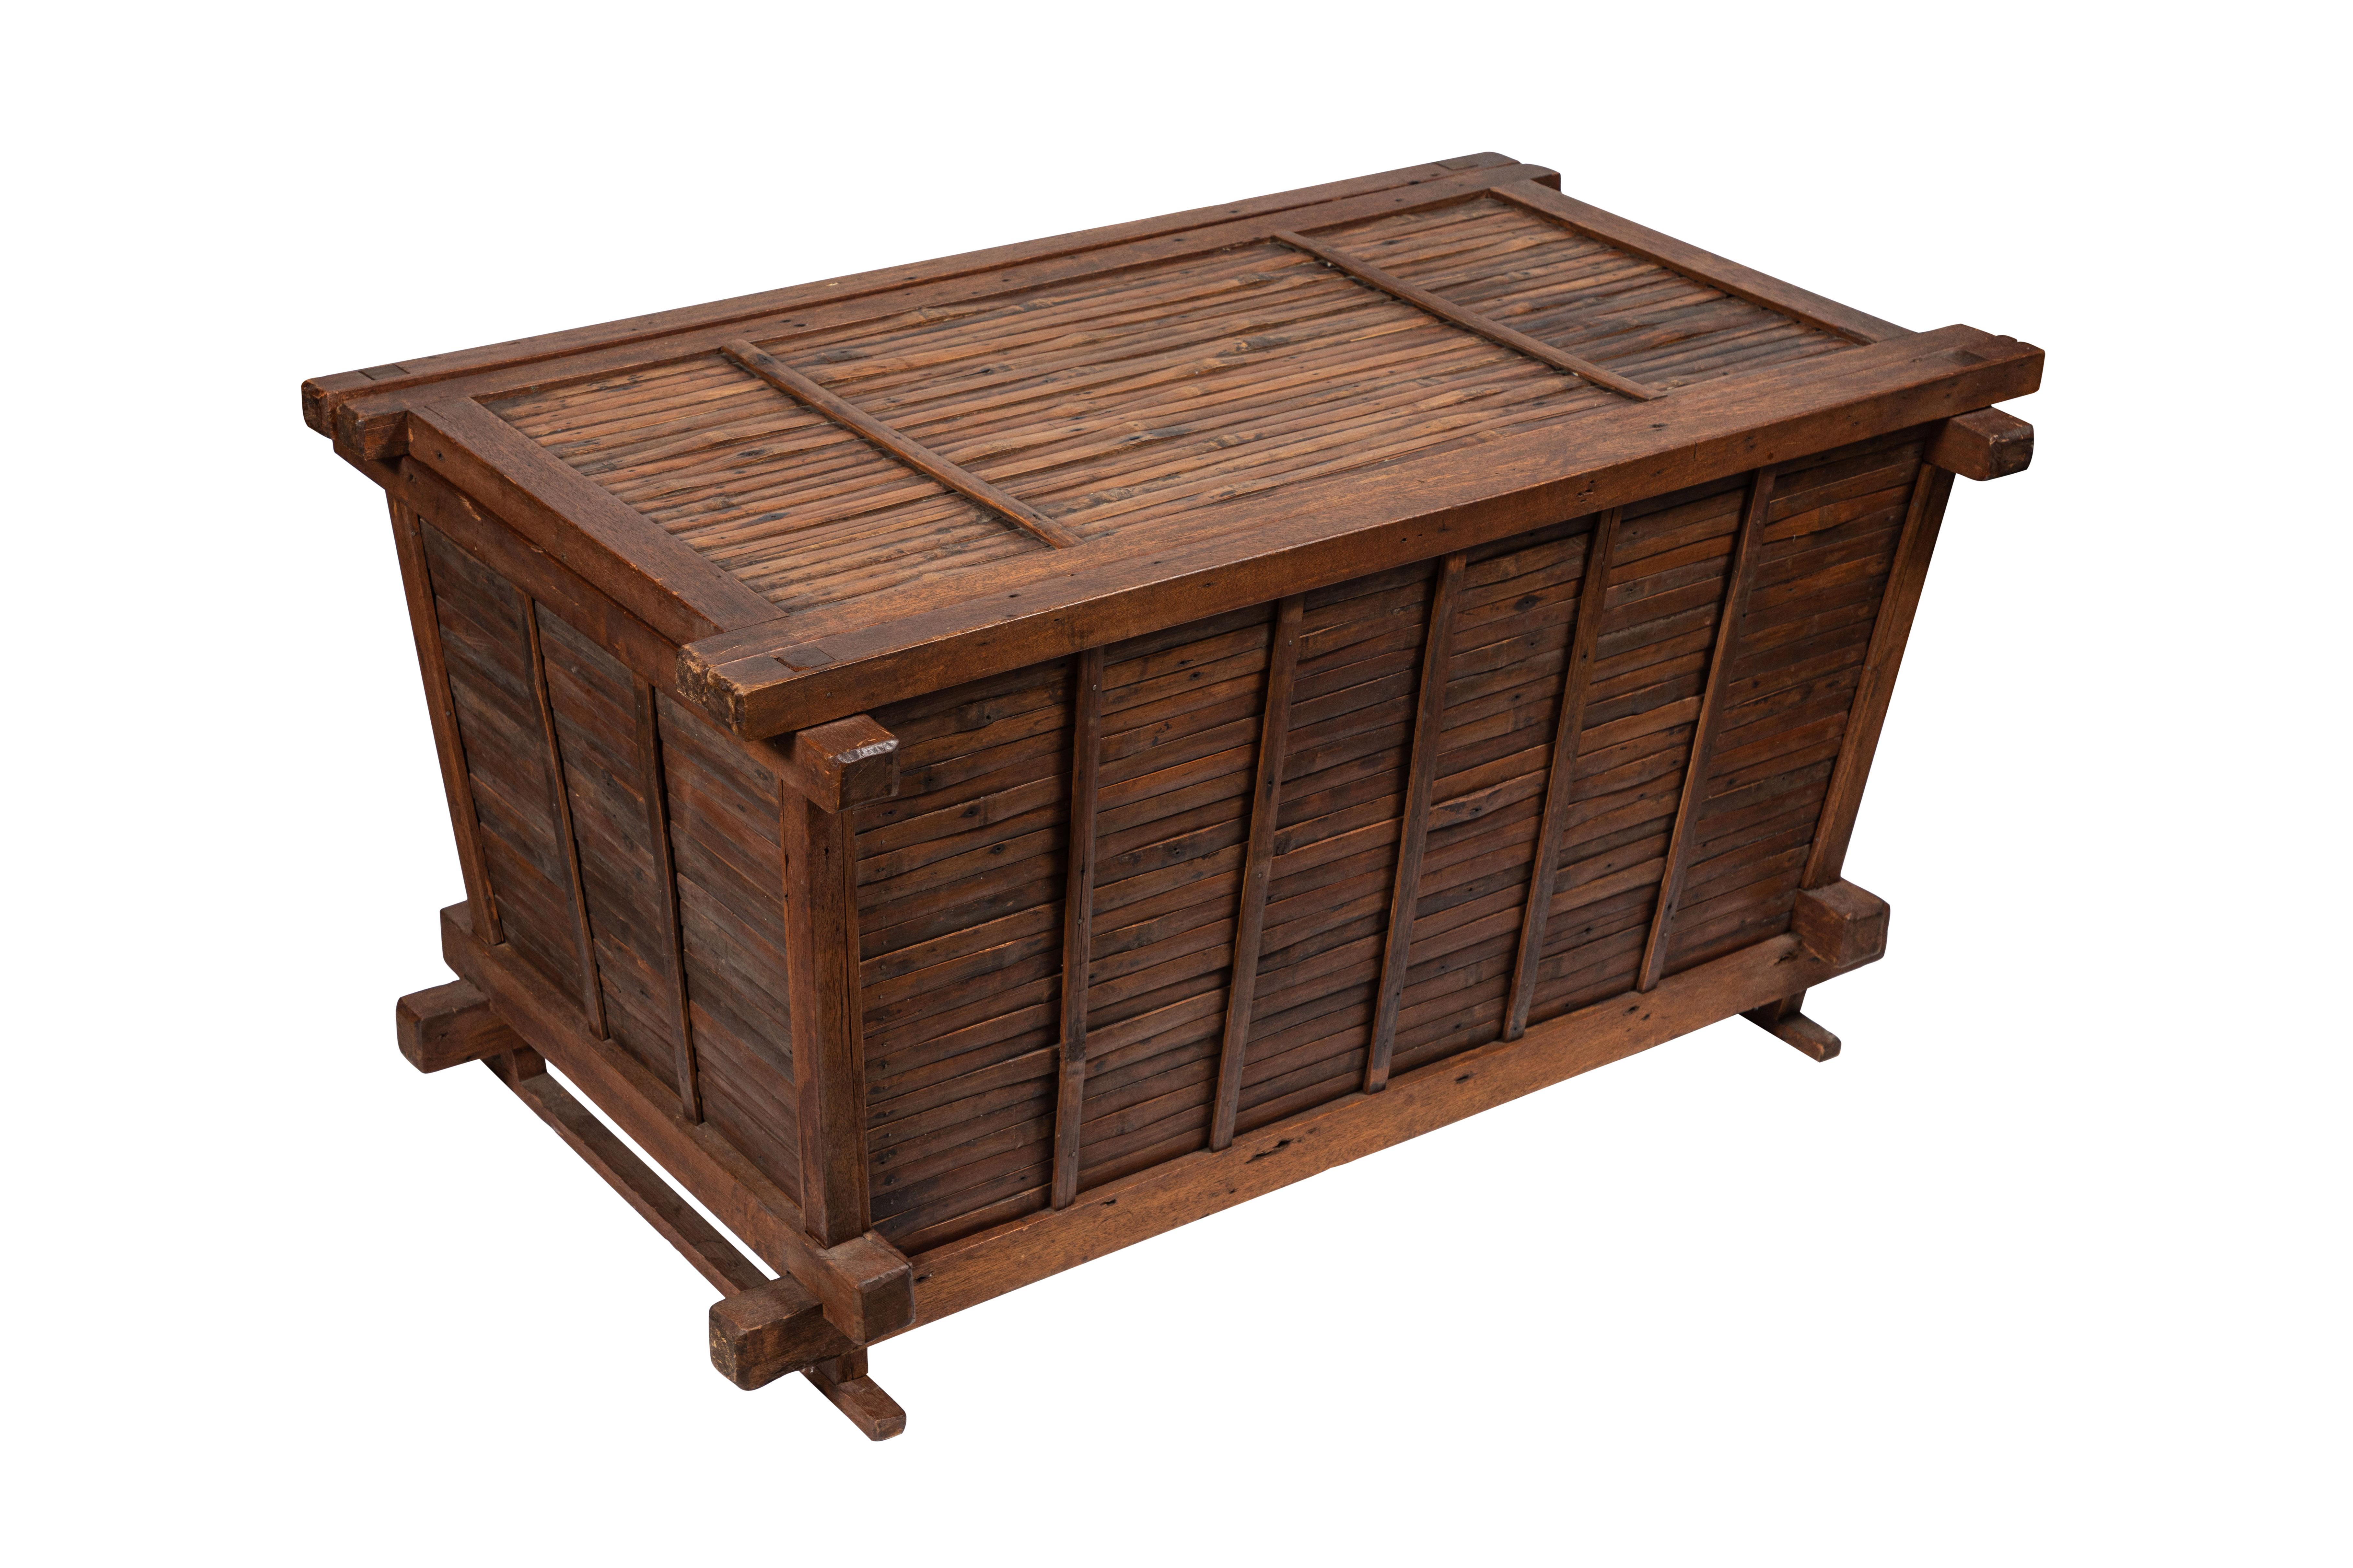 This rectangular vintage Chinese trunk made of split bamboo sides and a wooden frame has a loose sliding top and sits on stretchers at base. The frame features mortise and tenon joins; elsewhere, old nails. Note that this unusual and functional